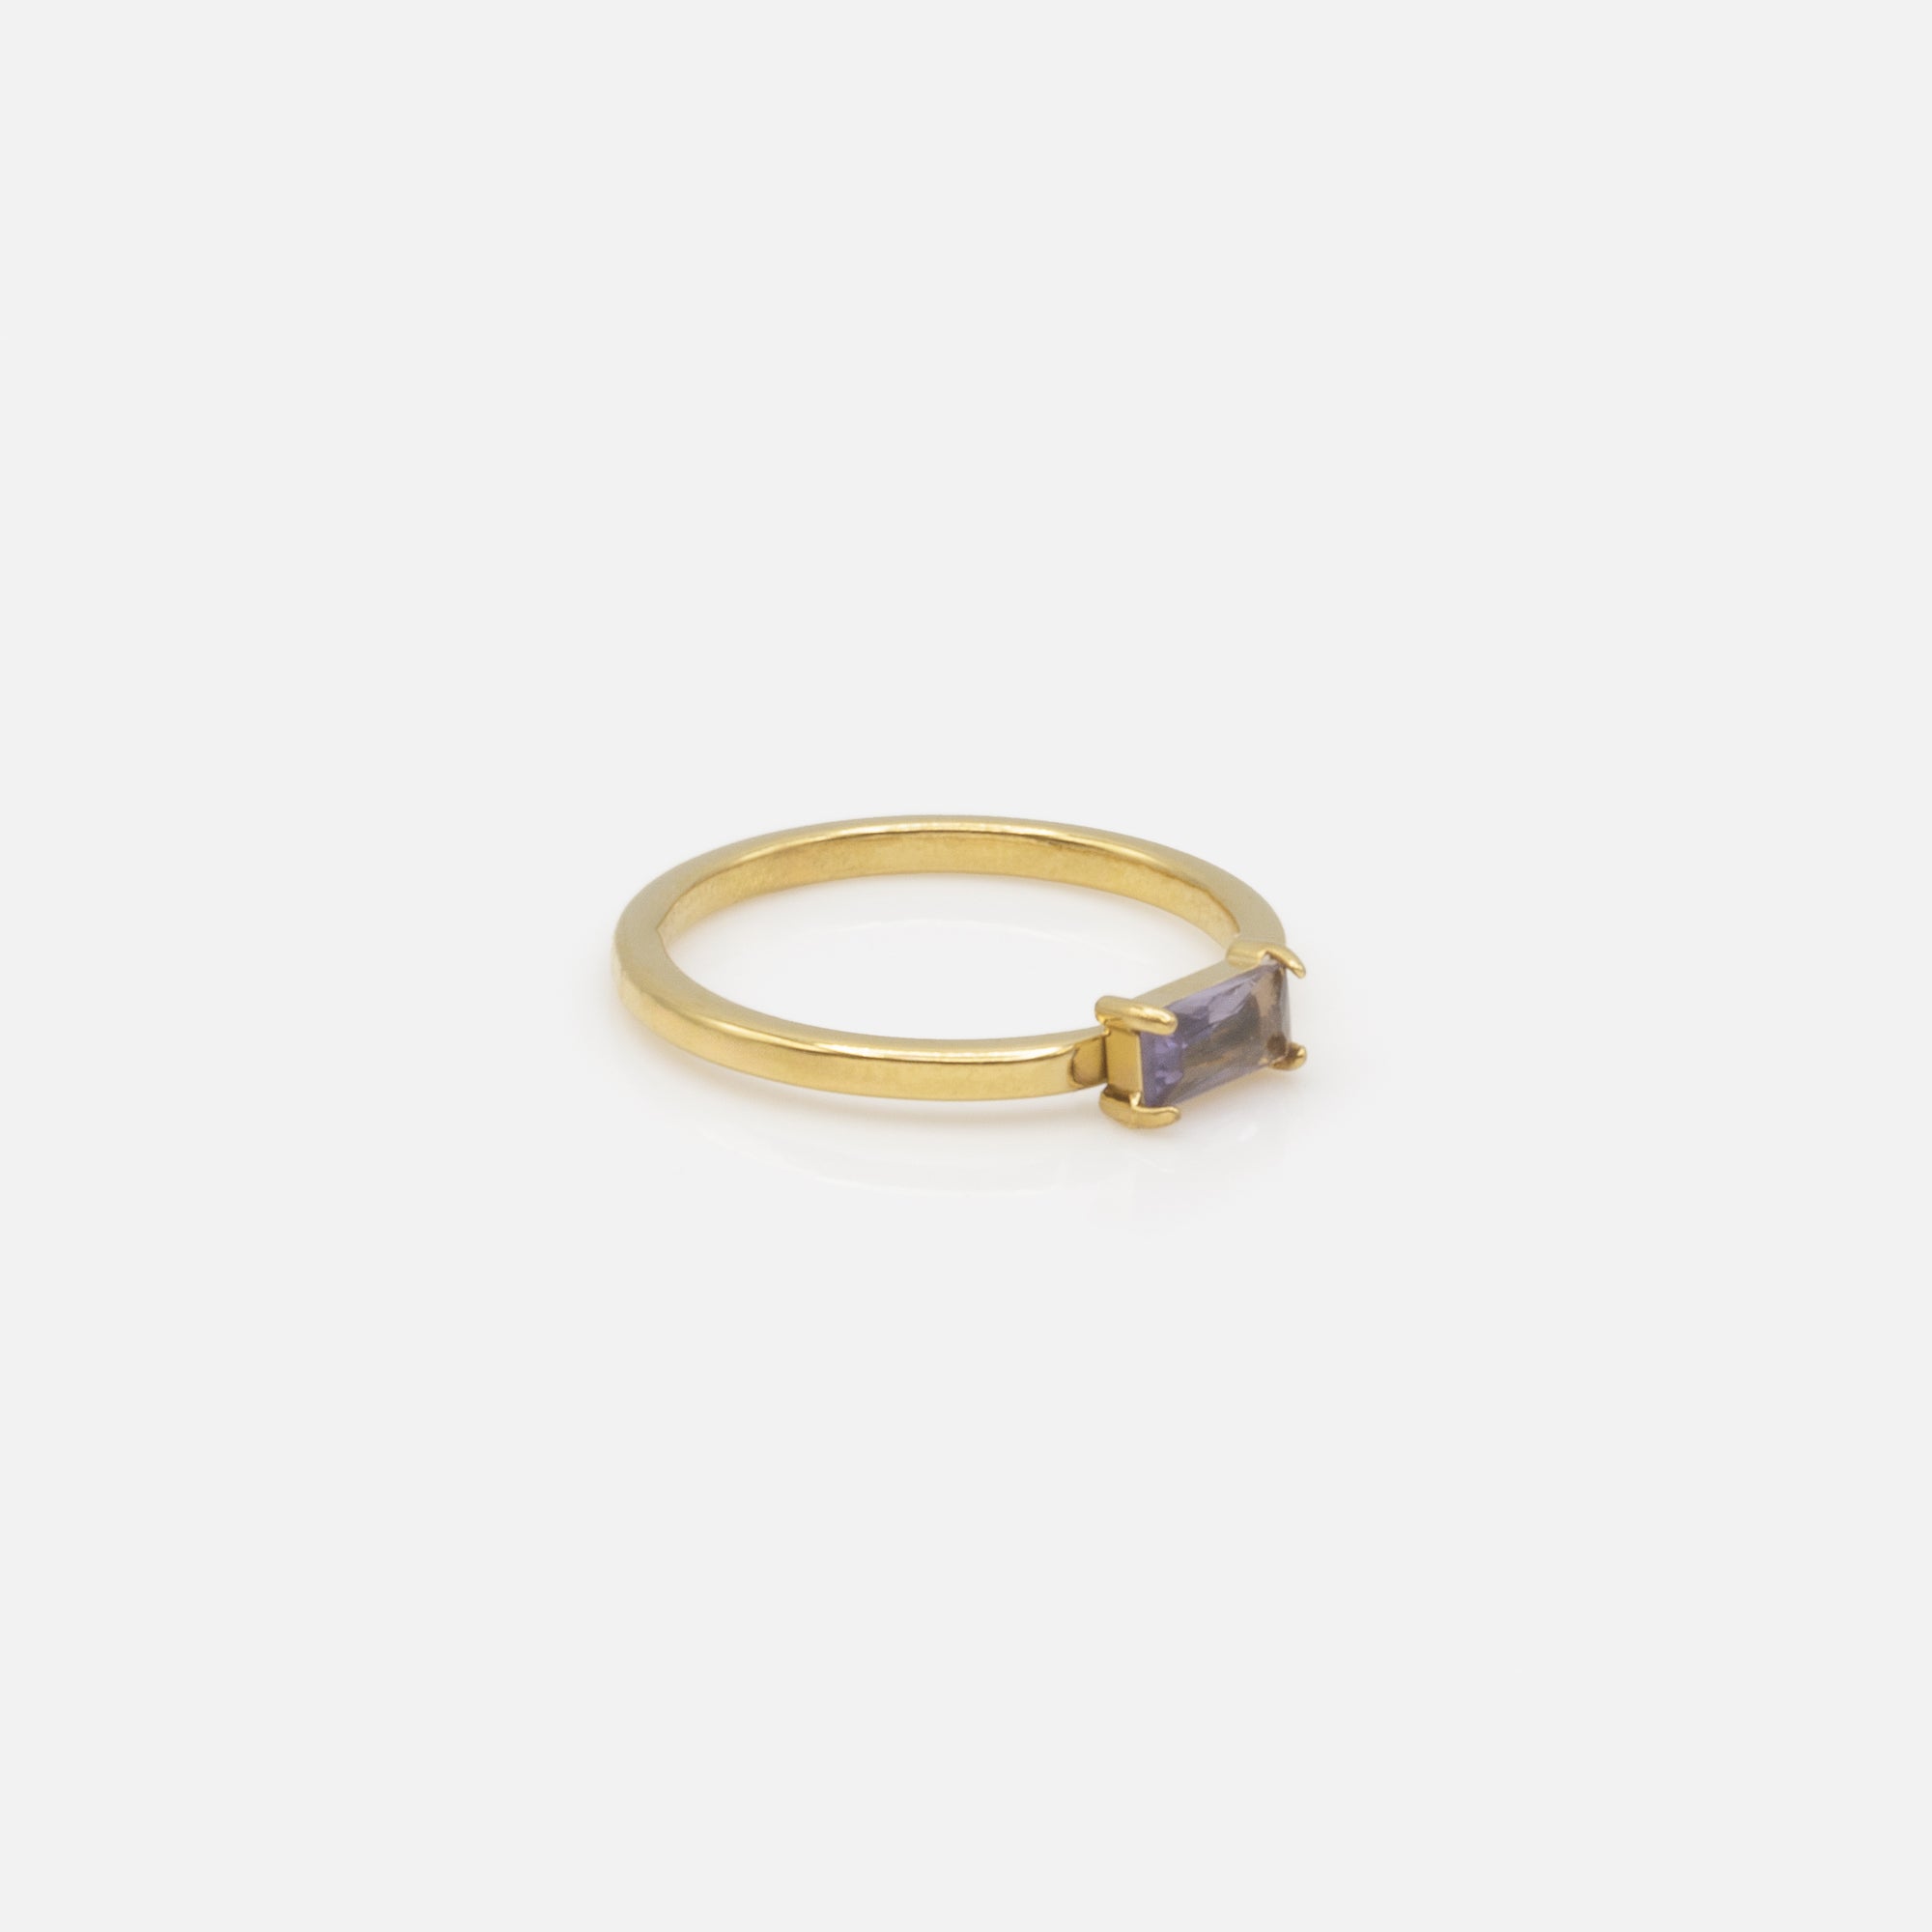 Gold ring with purple rectangular stone in stainless steel